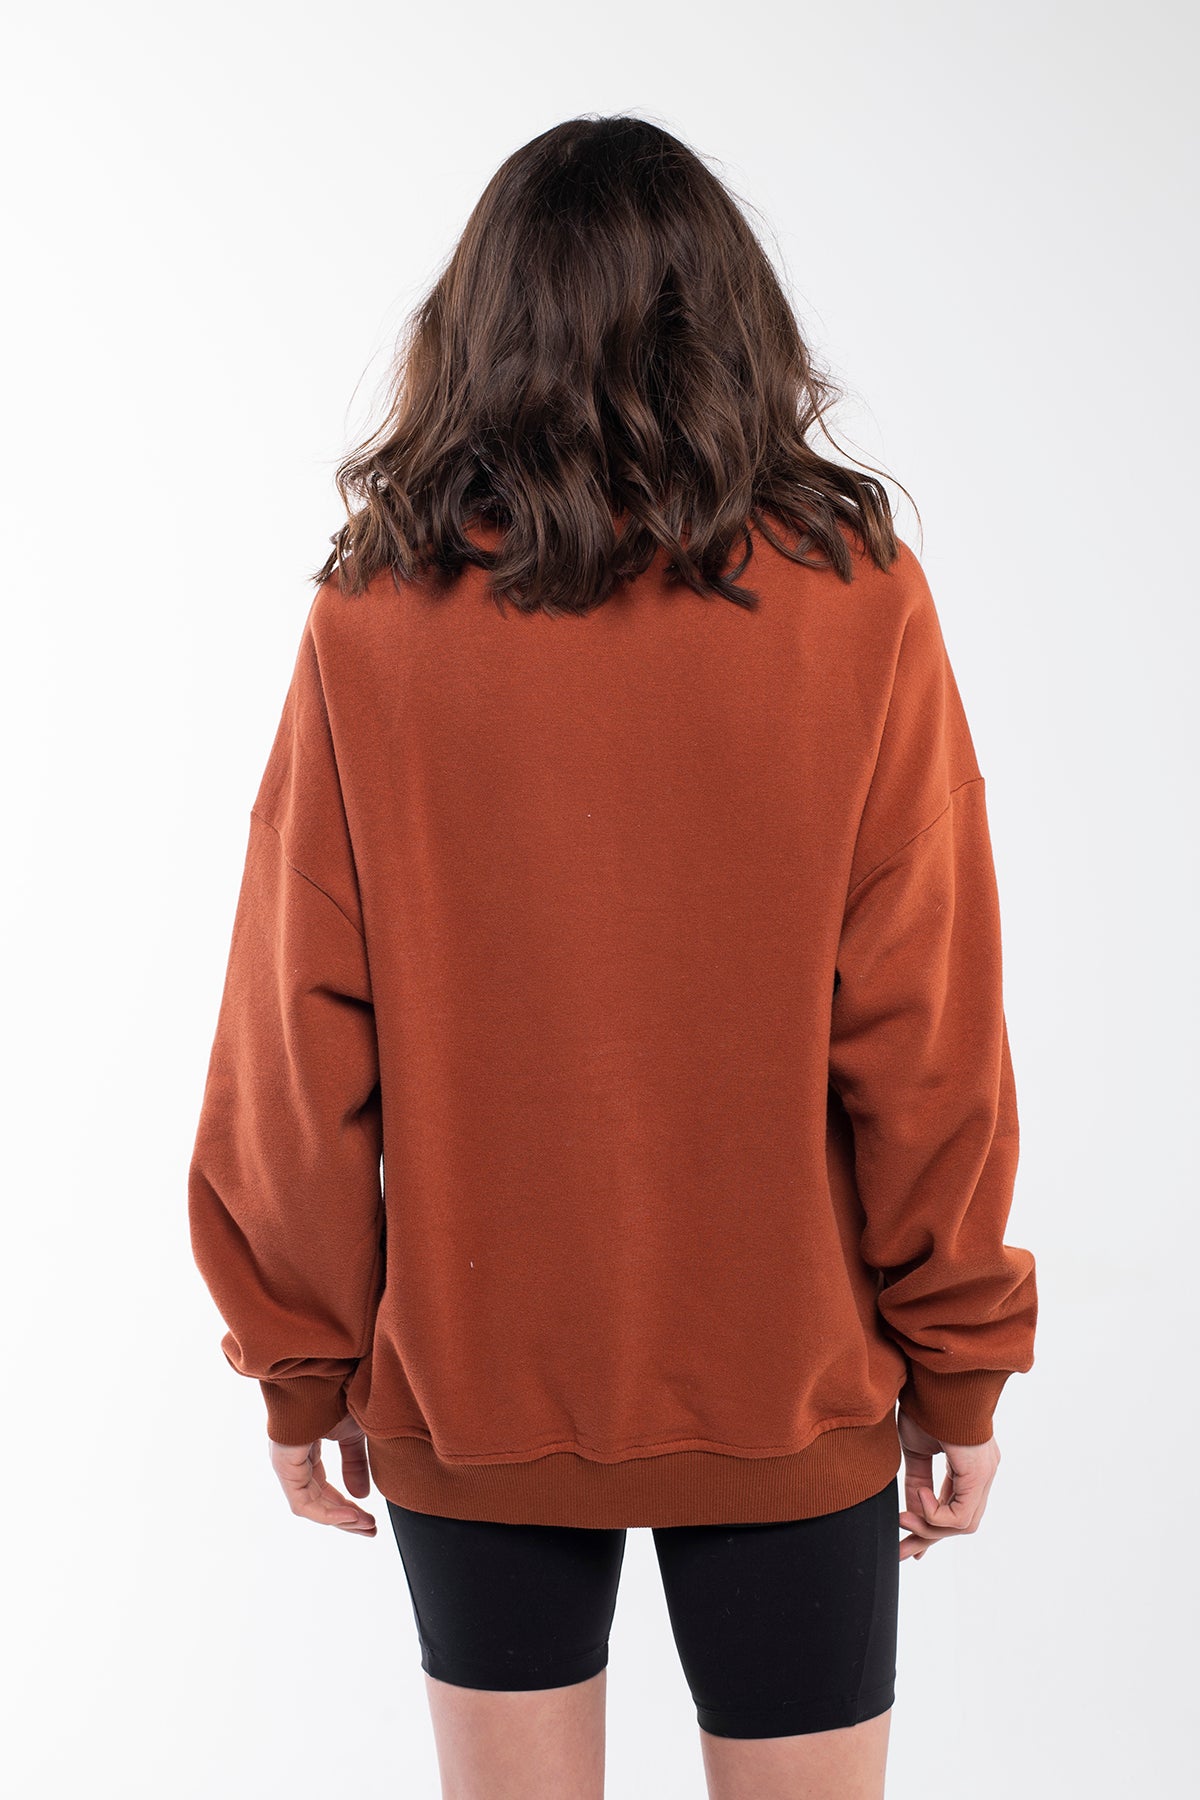 Comfortable red brown balance stones sweatshirt with a round neck